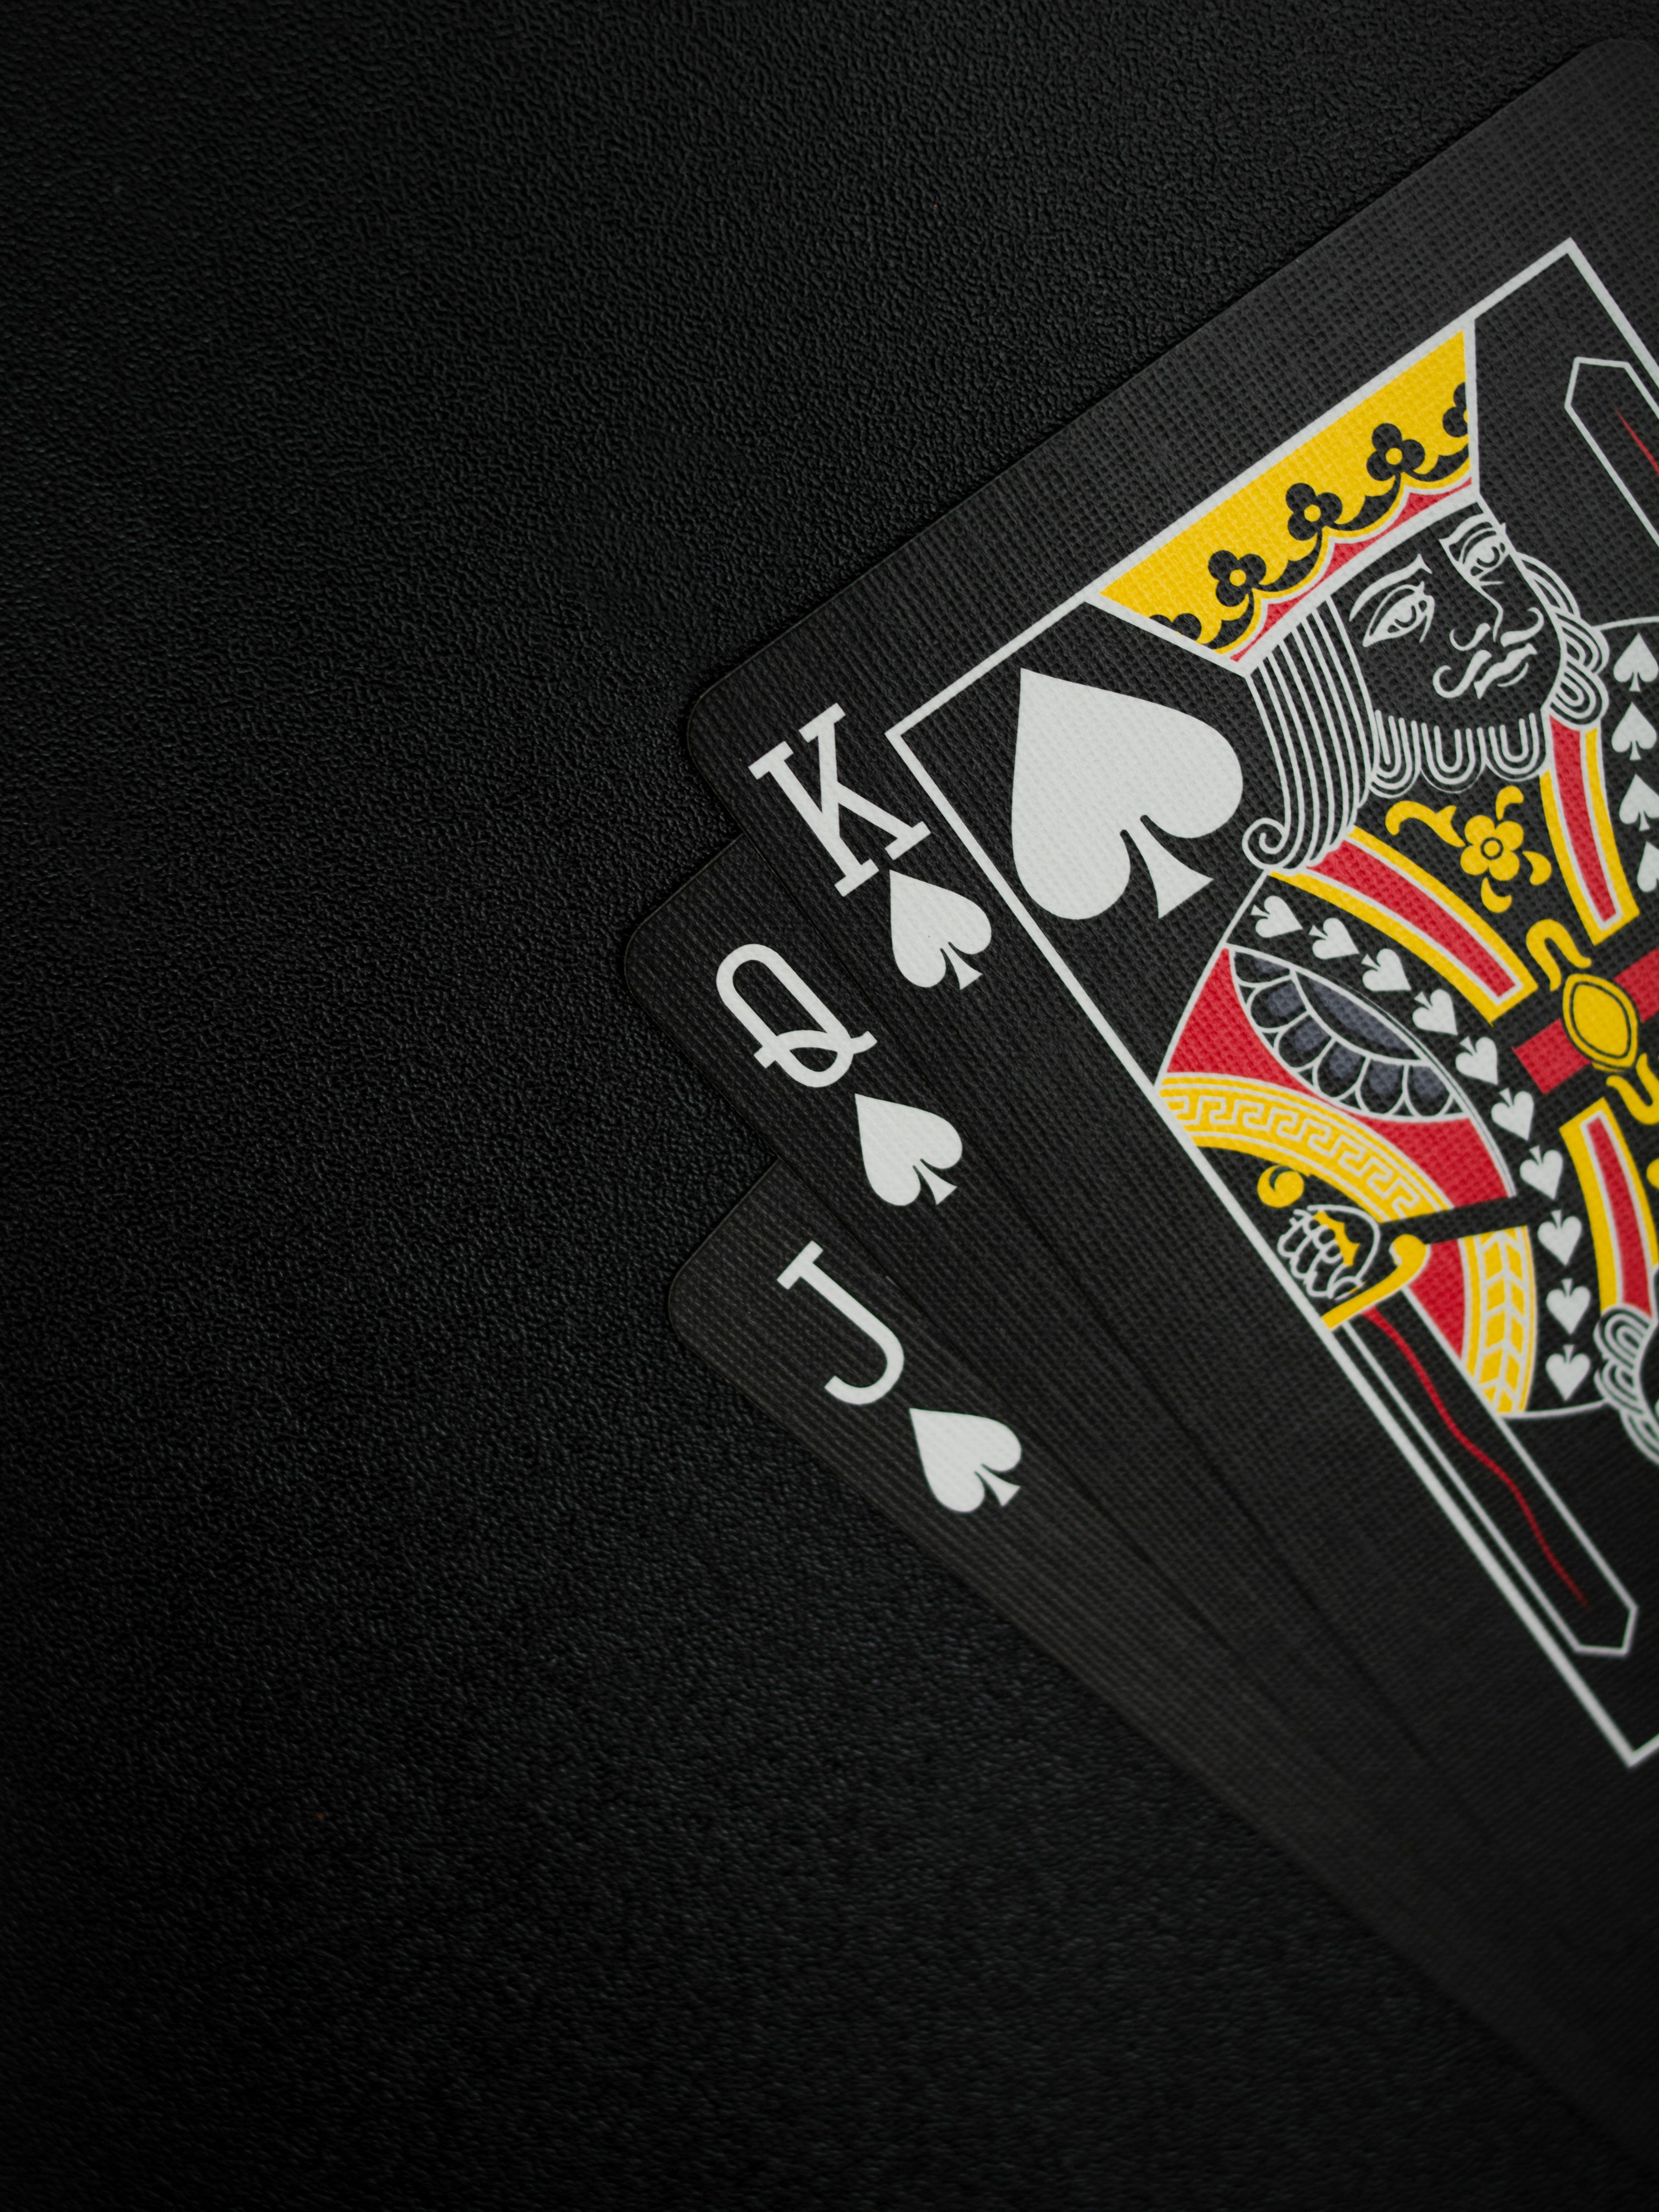 Black Playing Cards on Black Background · Free Stock Photo